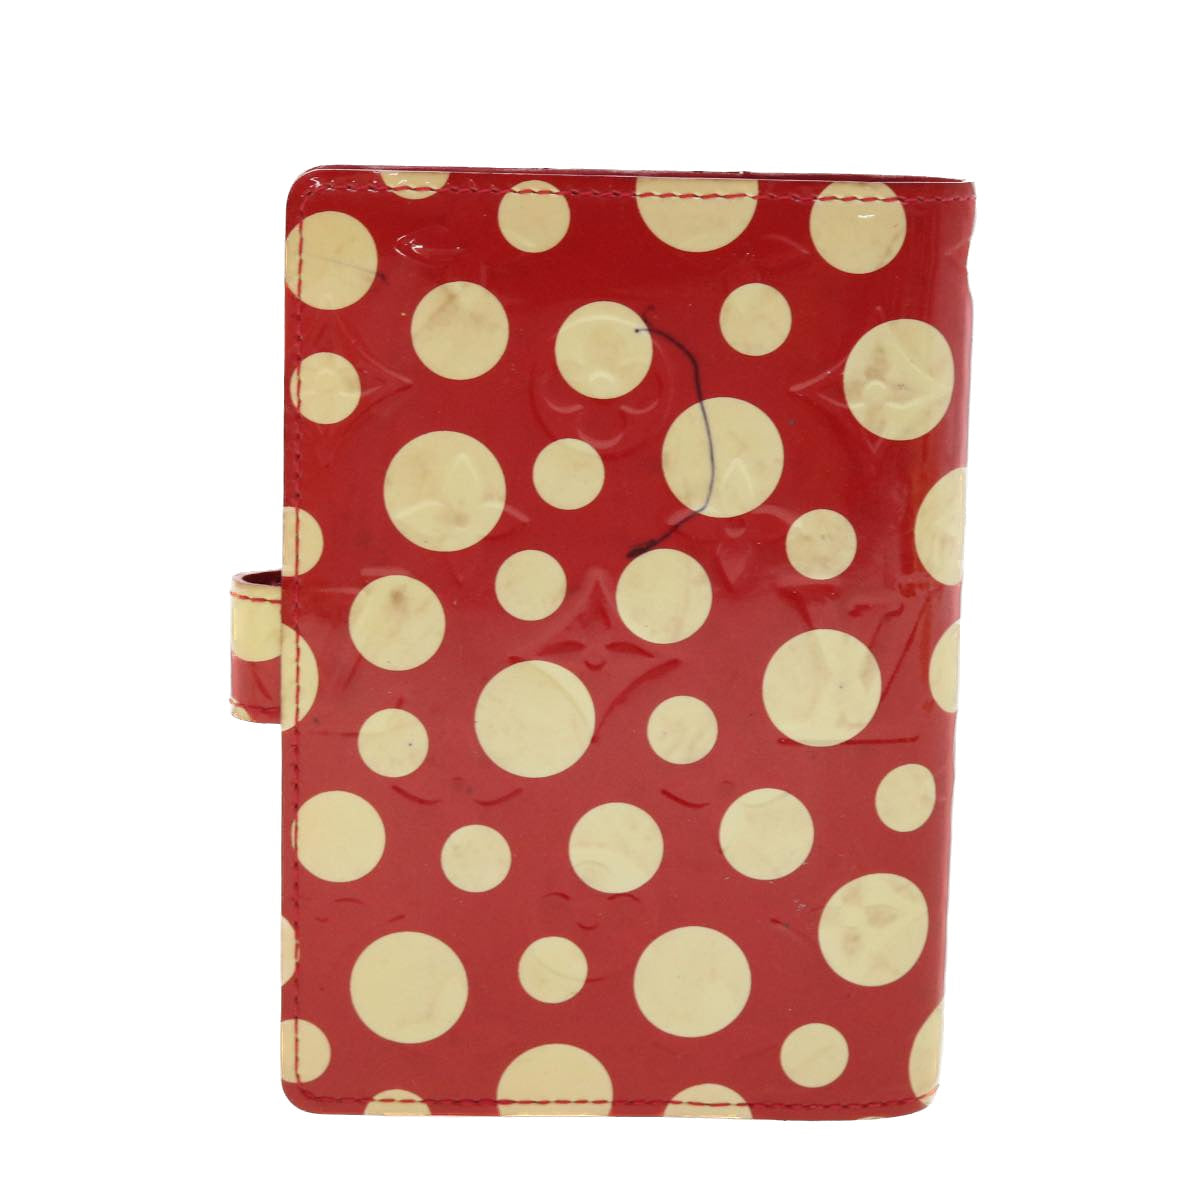 LOUIS VUITTON Vernis Yayoi Kusama Agenda PM Day Planner Cover M91518 Auth 40465 - 0